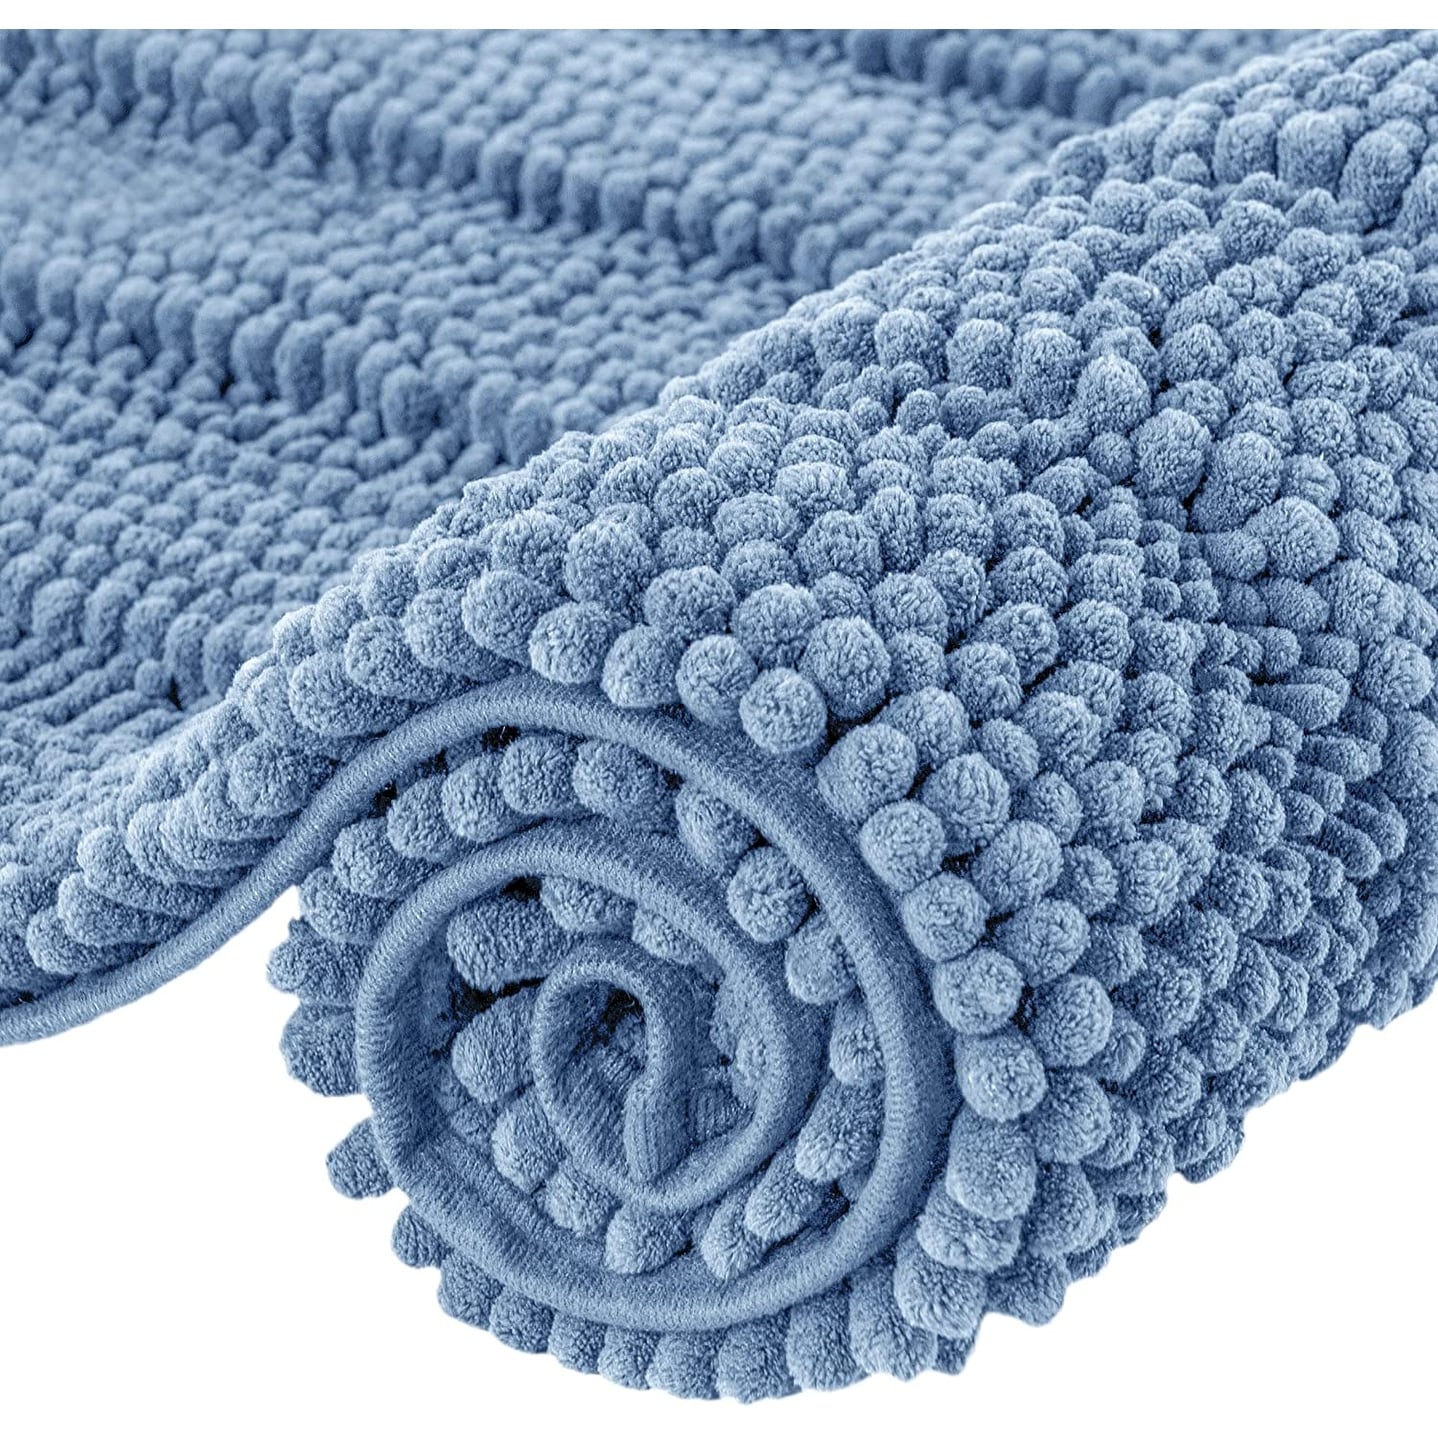 https://ak1.ostkcdn.com/images/products/is/images/direct/ce947a34036ce607120b0272d94afa8d8dc85934/Subrtex-Supersoft-Absorbent-Braided-Bathroom-Chenille-Bath-Rugs.jpg